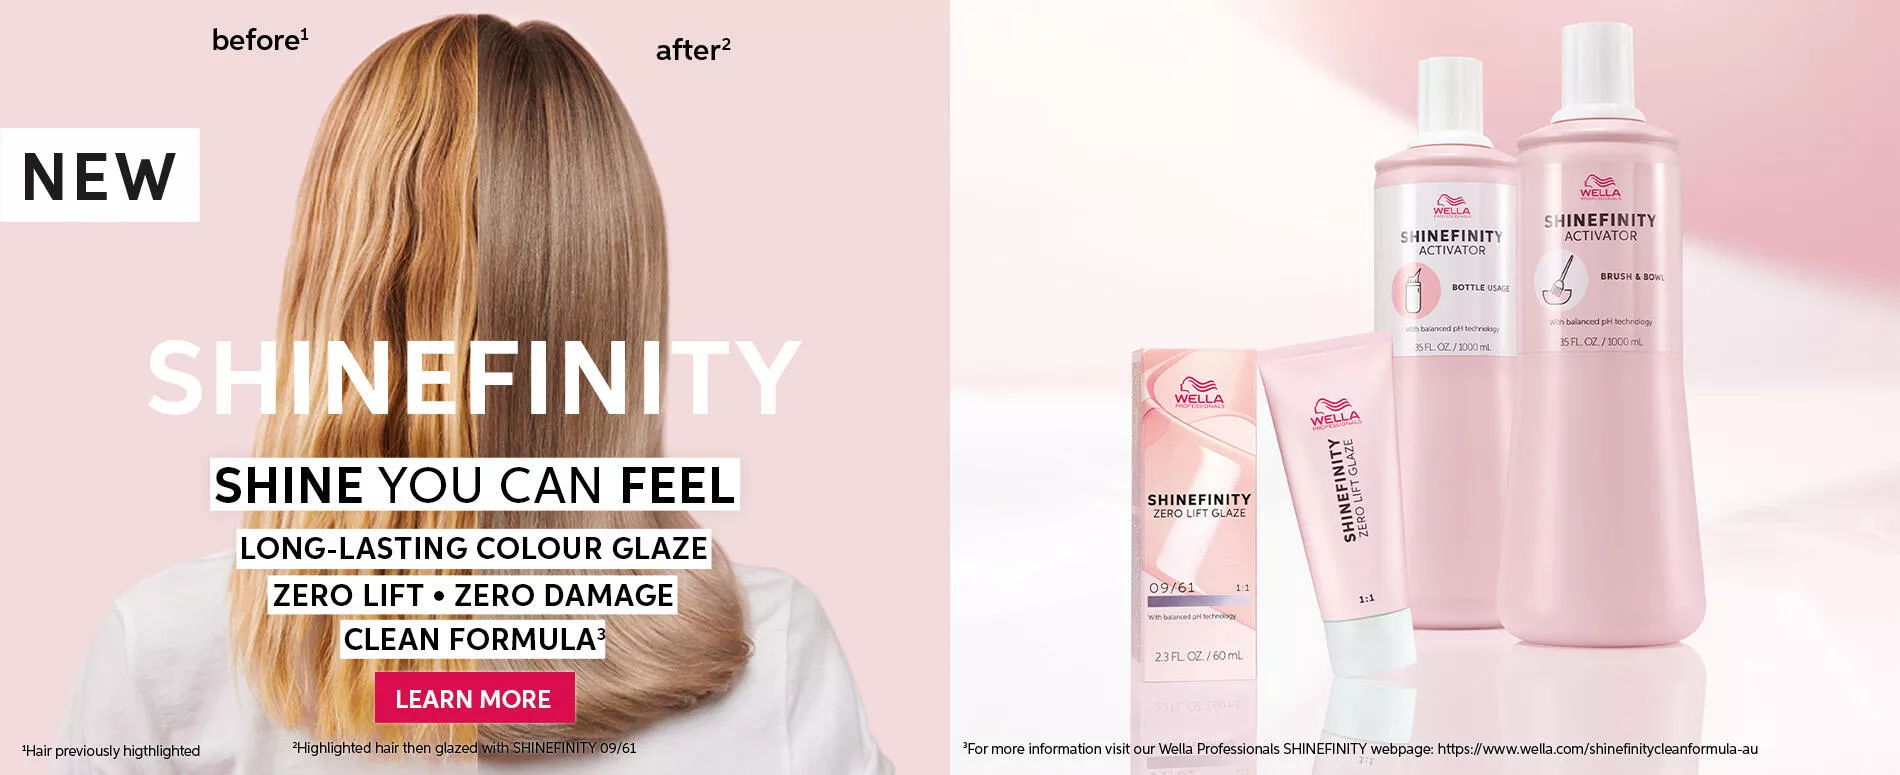 A before and after split of a woman's hair showing enhanced, shiny hair after using  Shinefinity Zero Lift Hair Glaze from Wella Professionals.  Shinefinity zero lift hair glaze products by Wella Professionals.